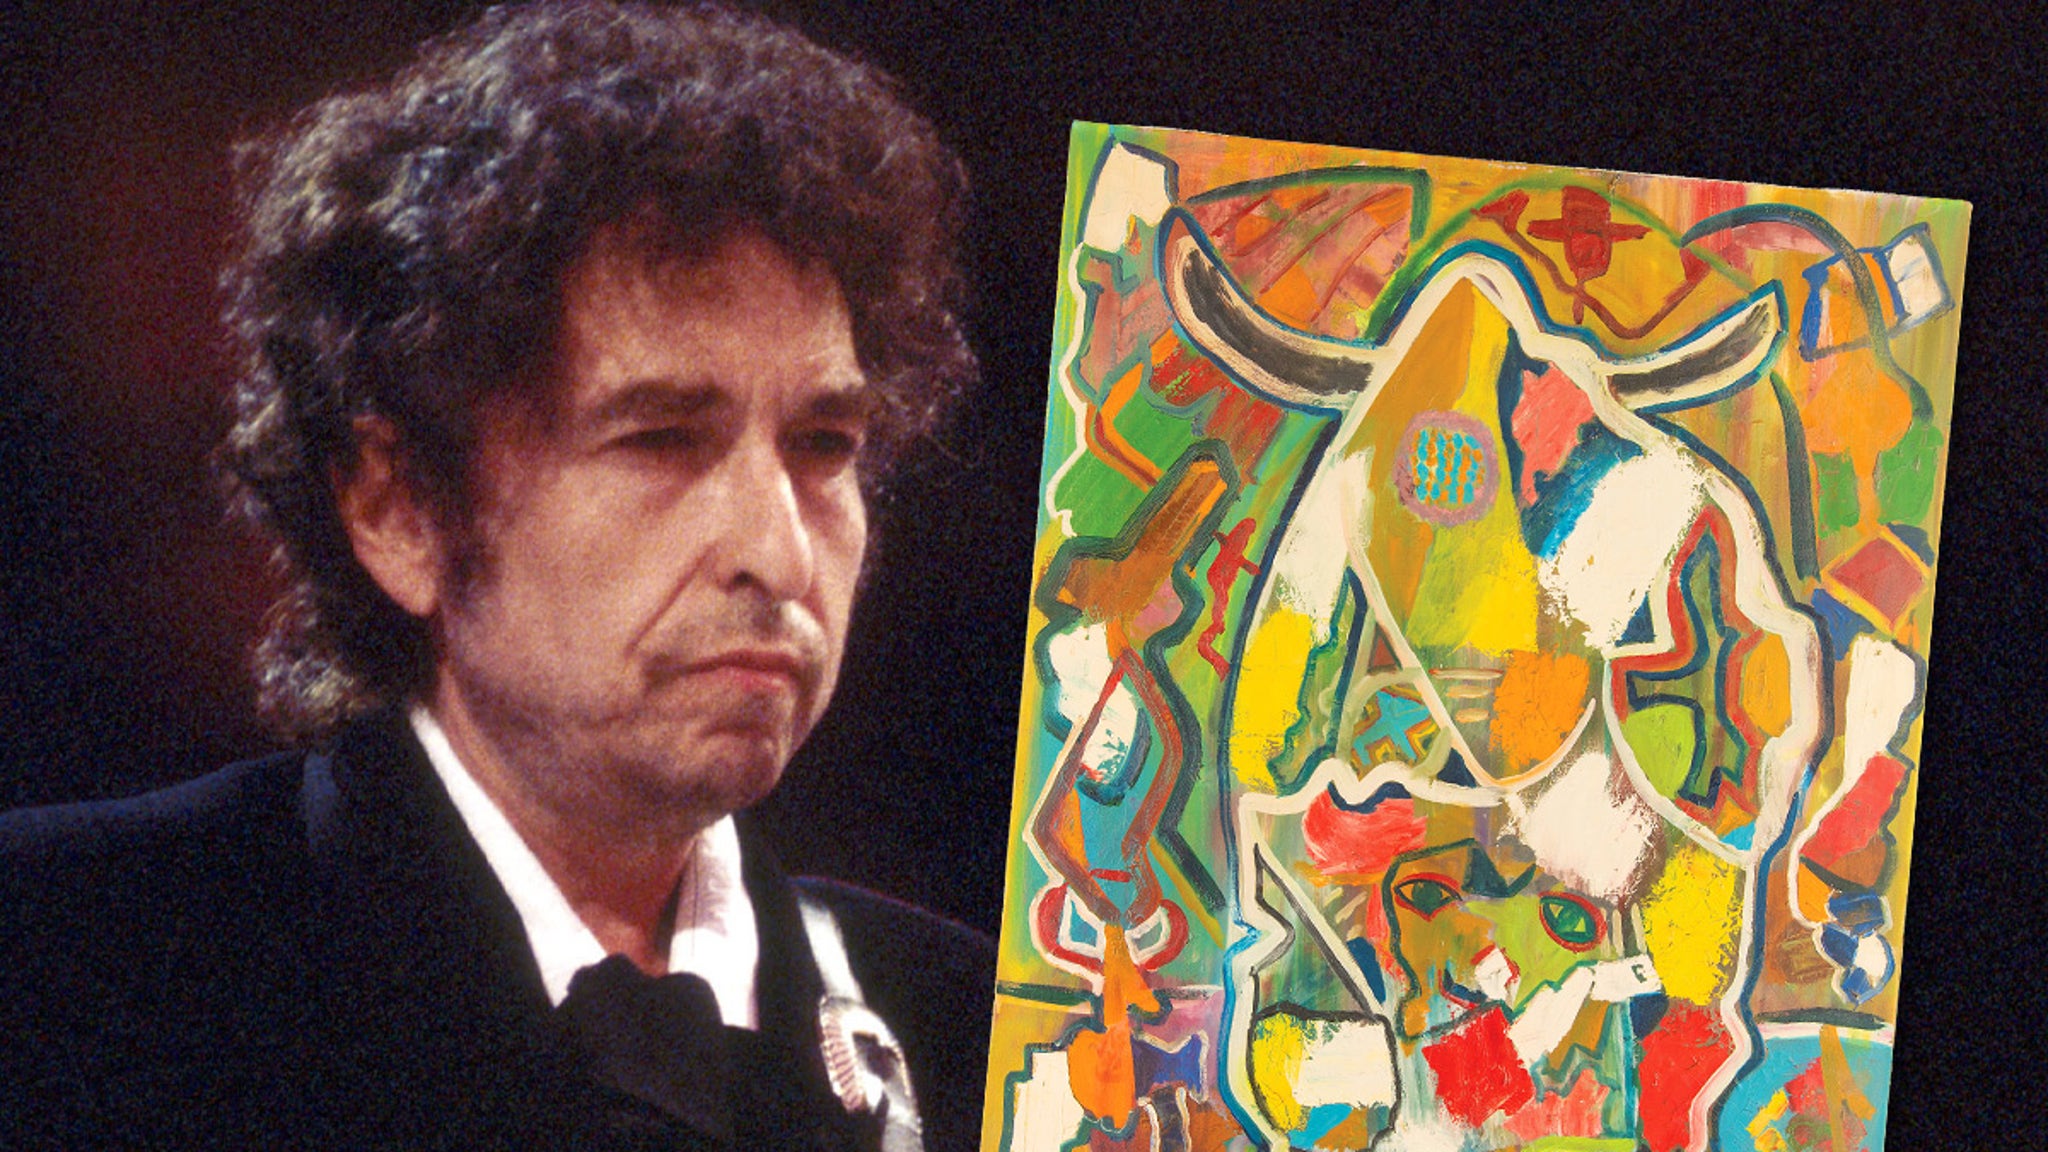 Rare Bob Dylan Painting Up for Auction, Worth $100K